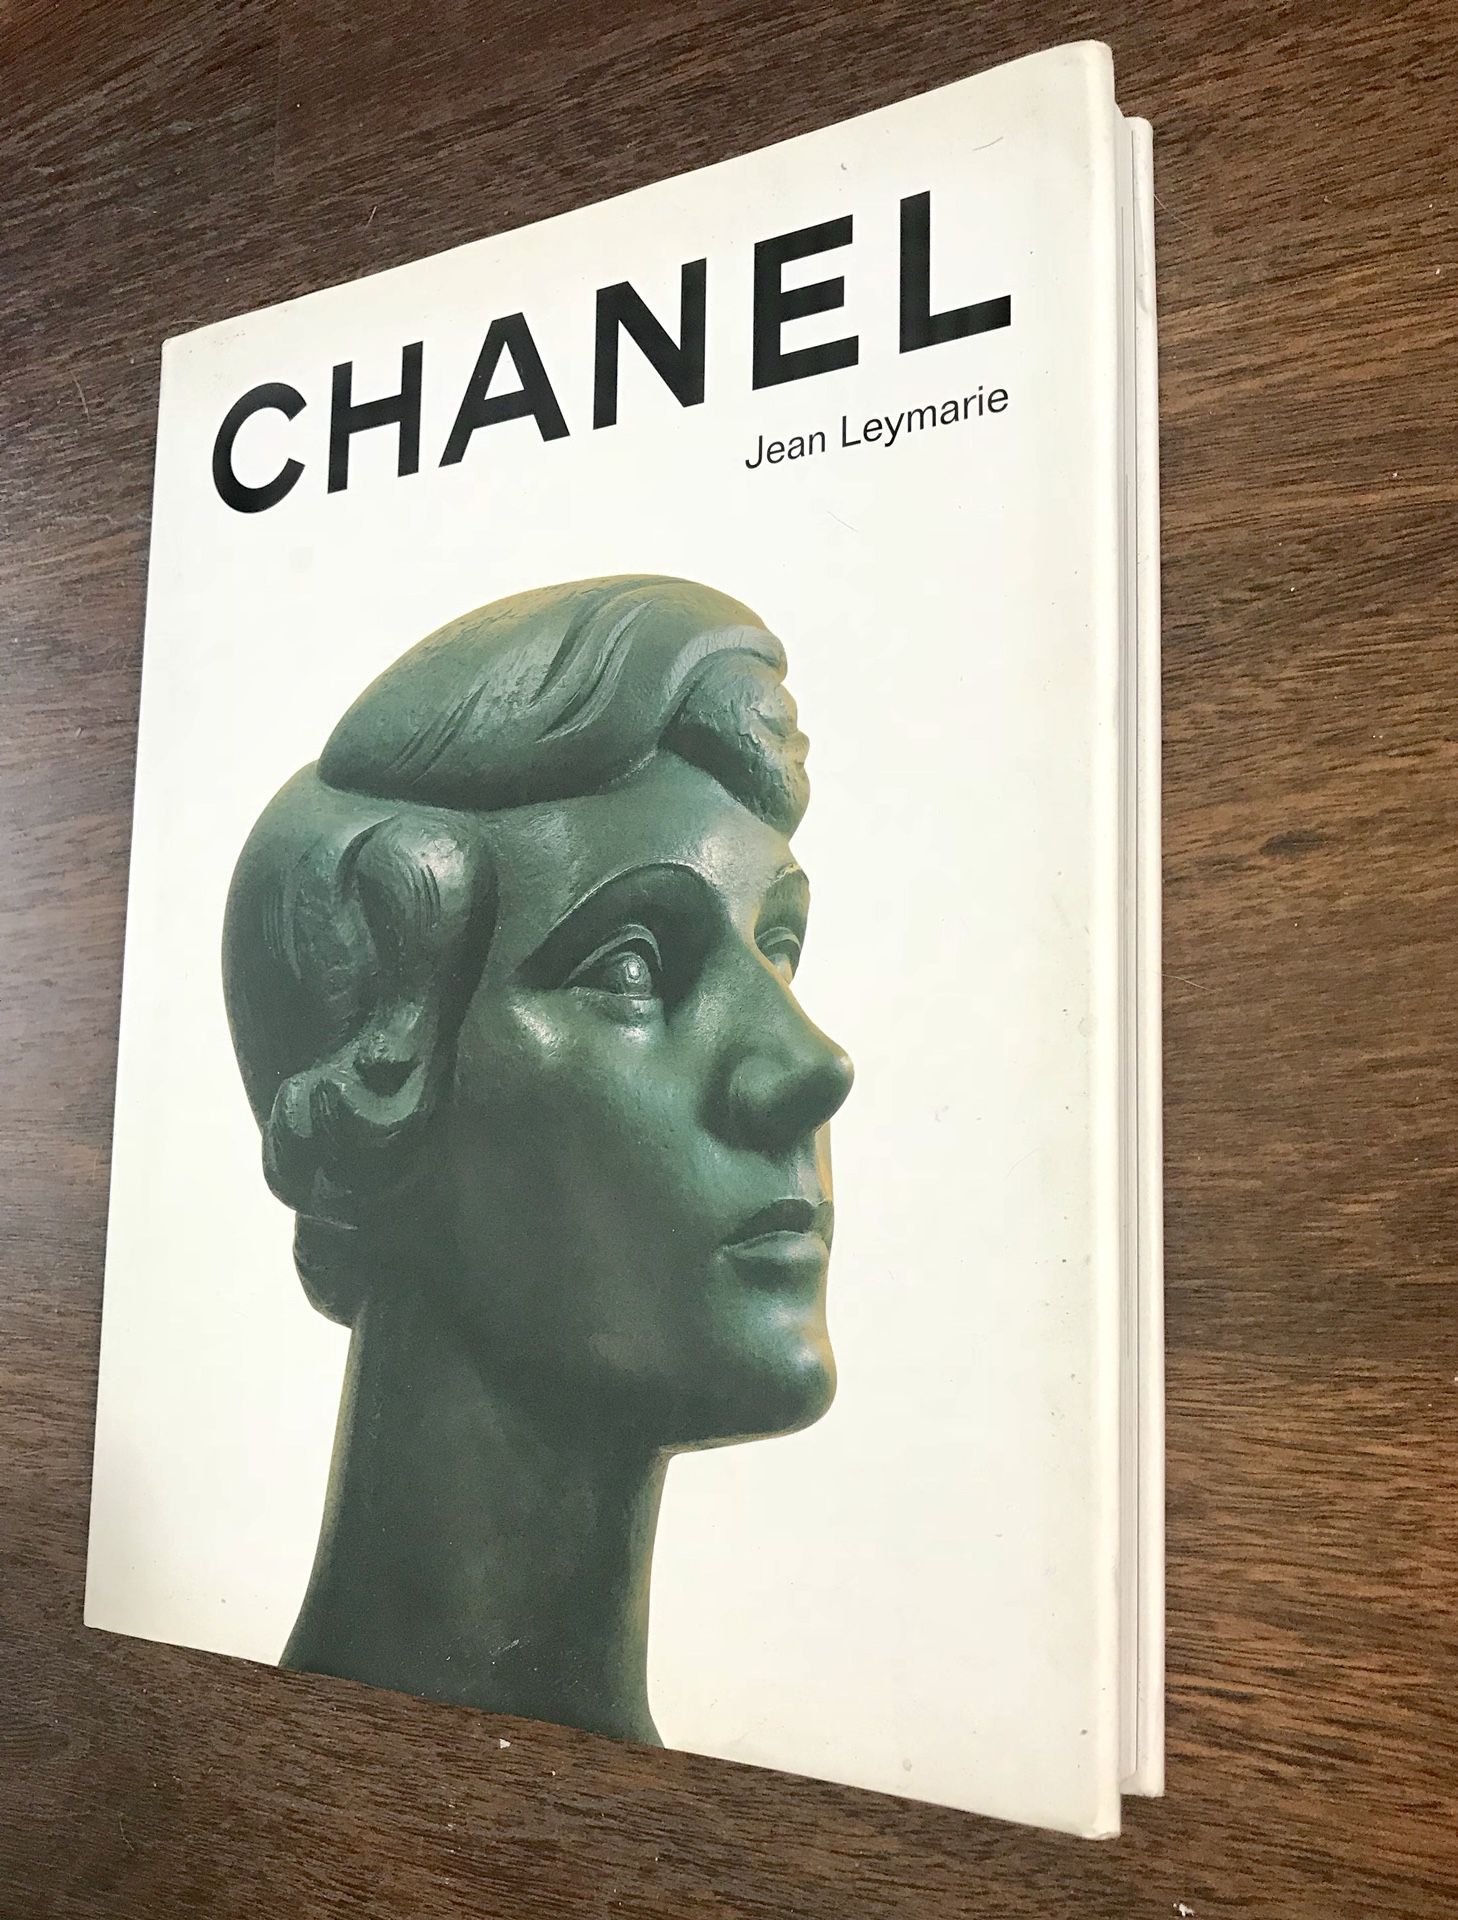 Coffee Table Book - “Chanel” by Jean Leymarie for Sale in Costa Mesa, CA -  OfferUp